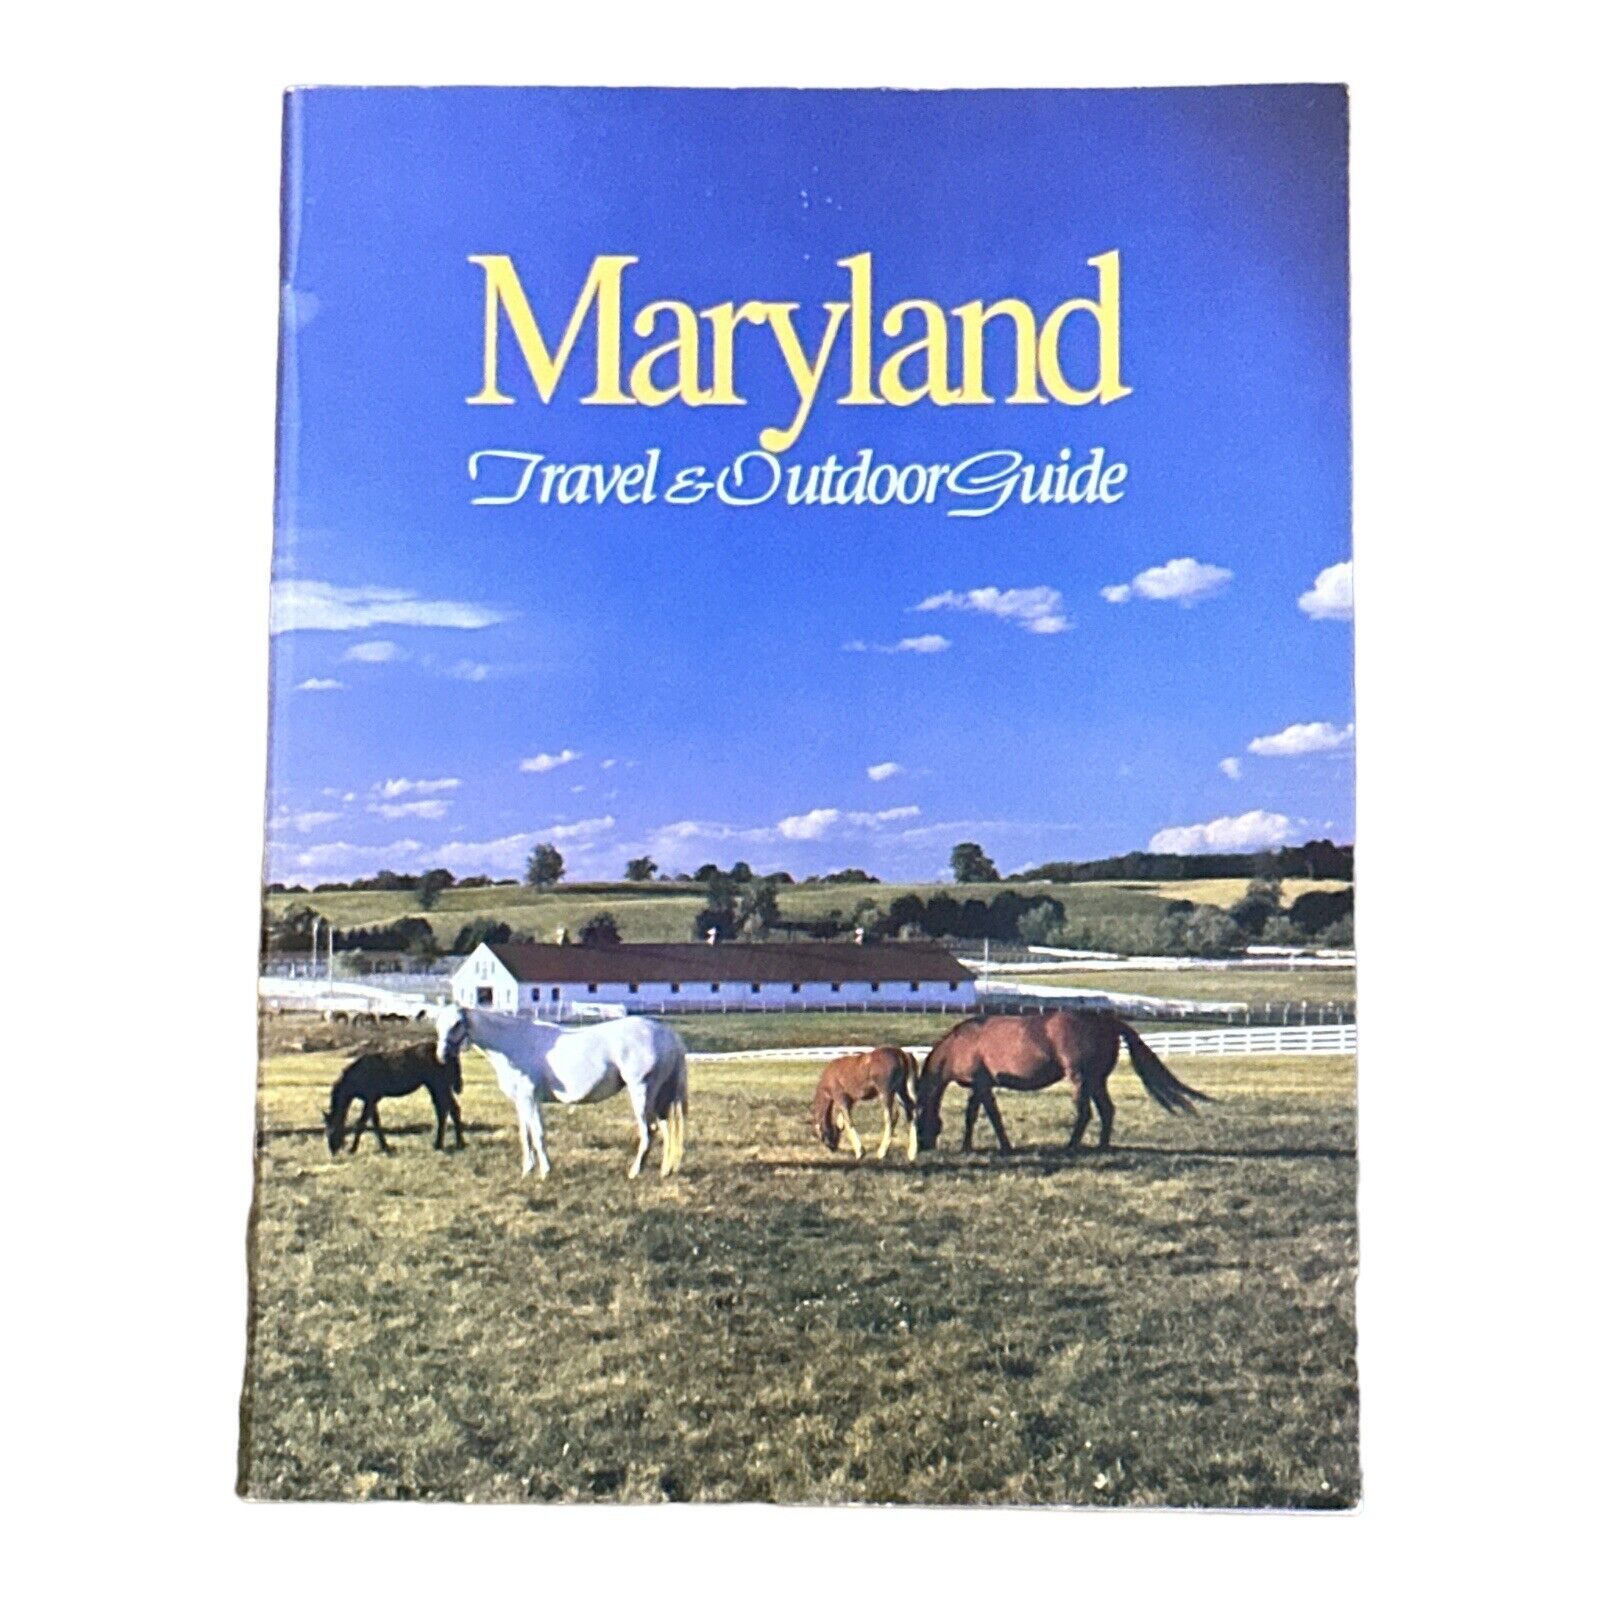 Maryland Official Travel and Outdoor Guide 1991 VINTAGE